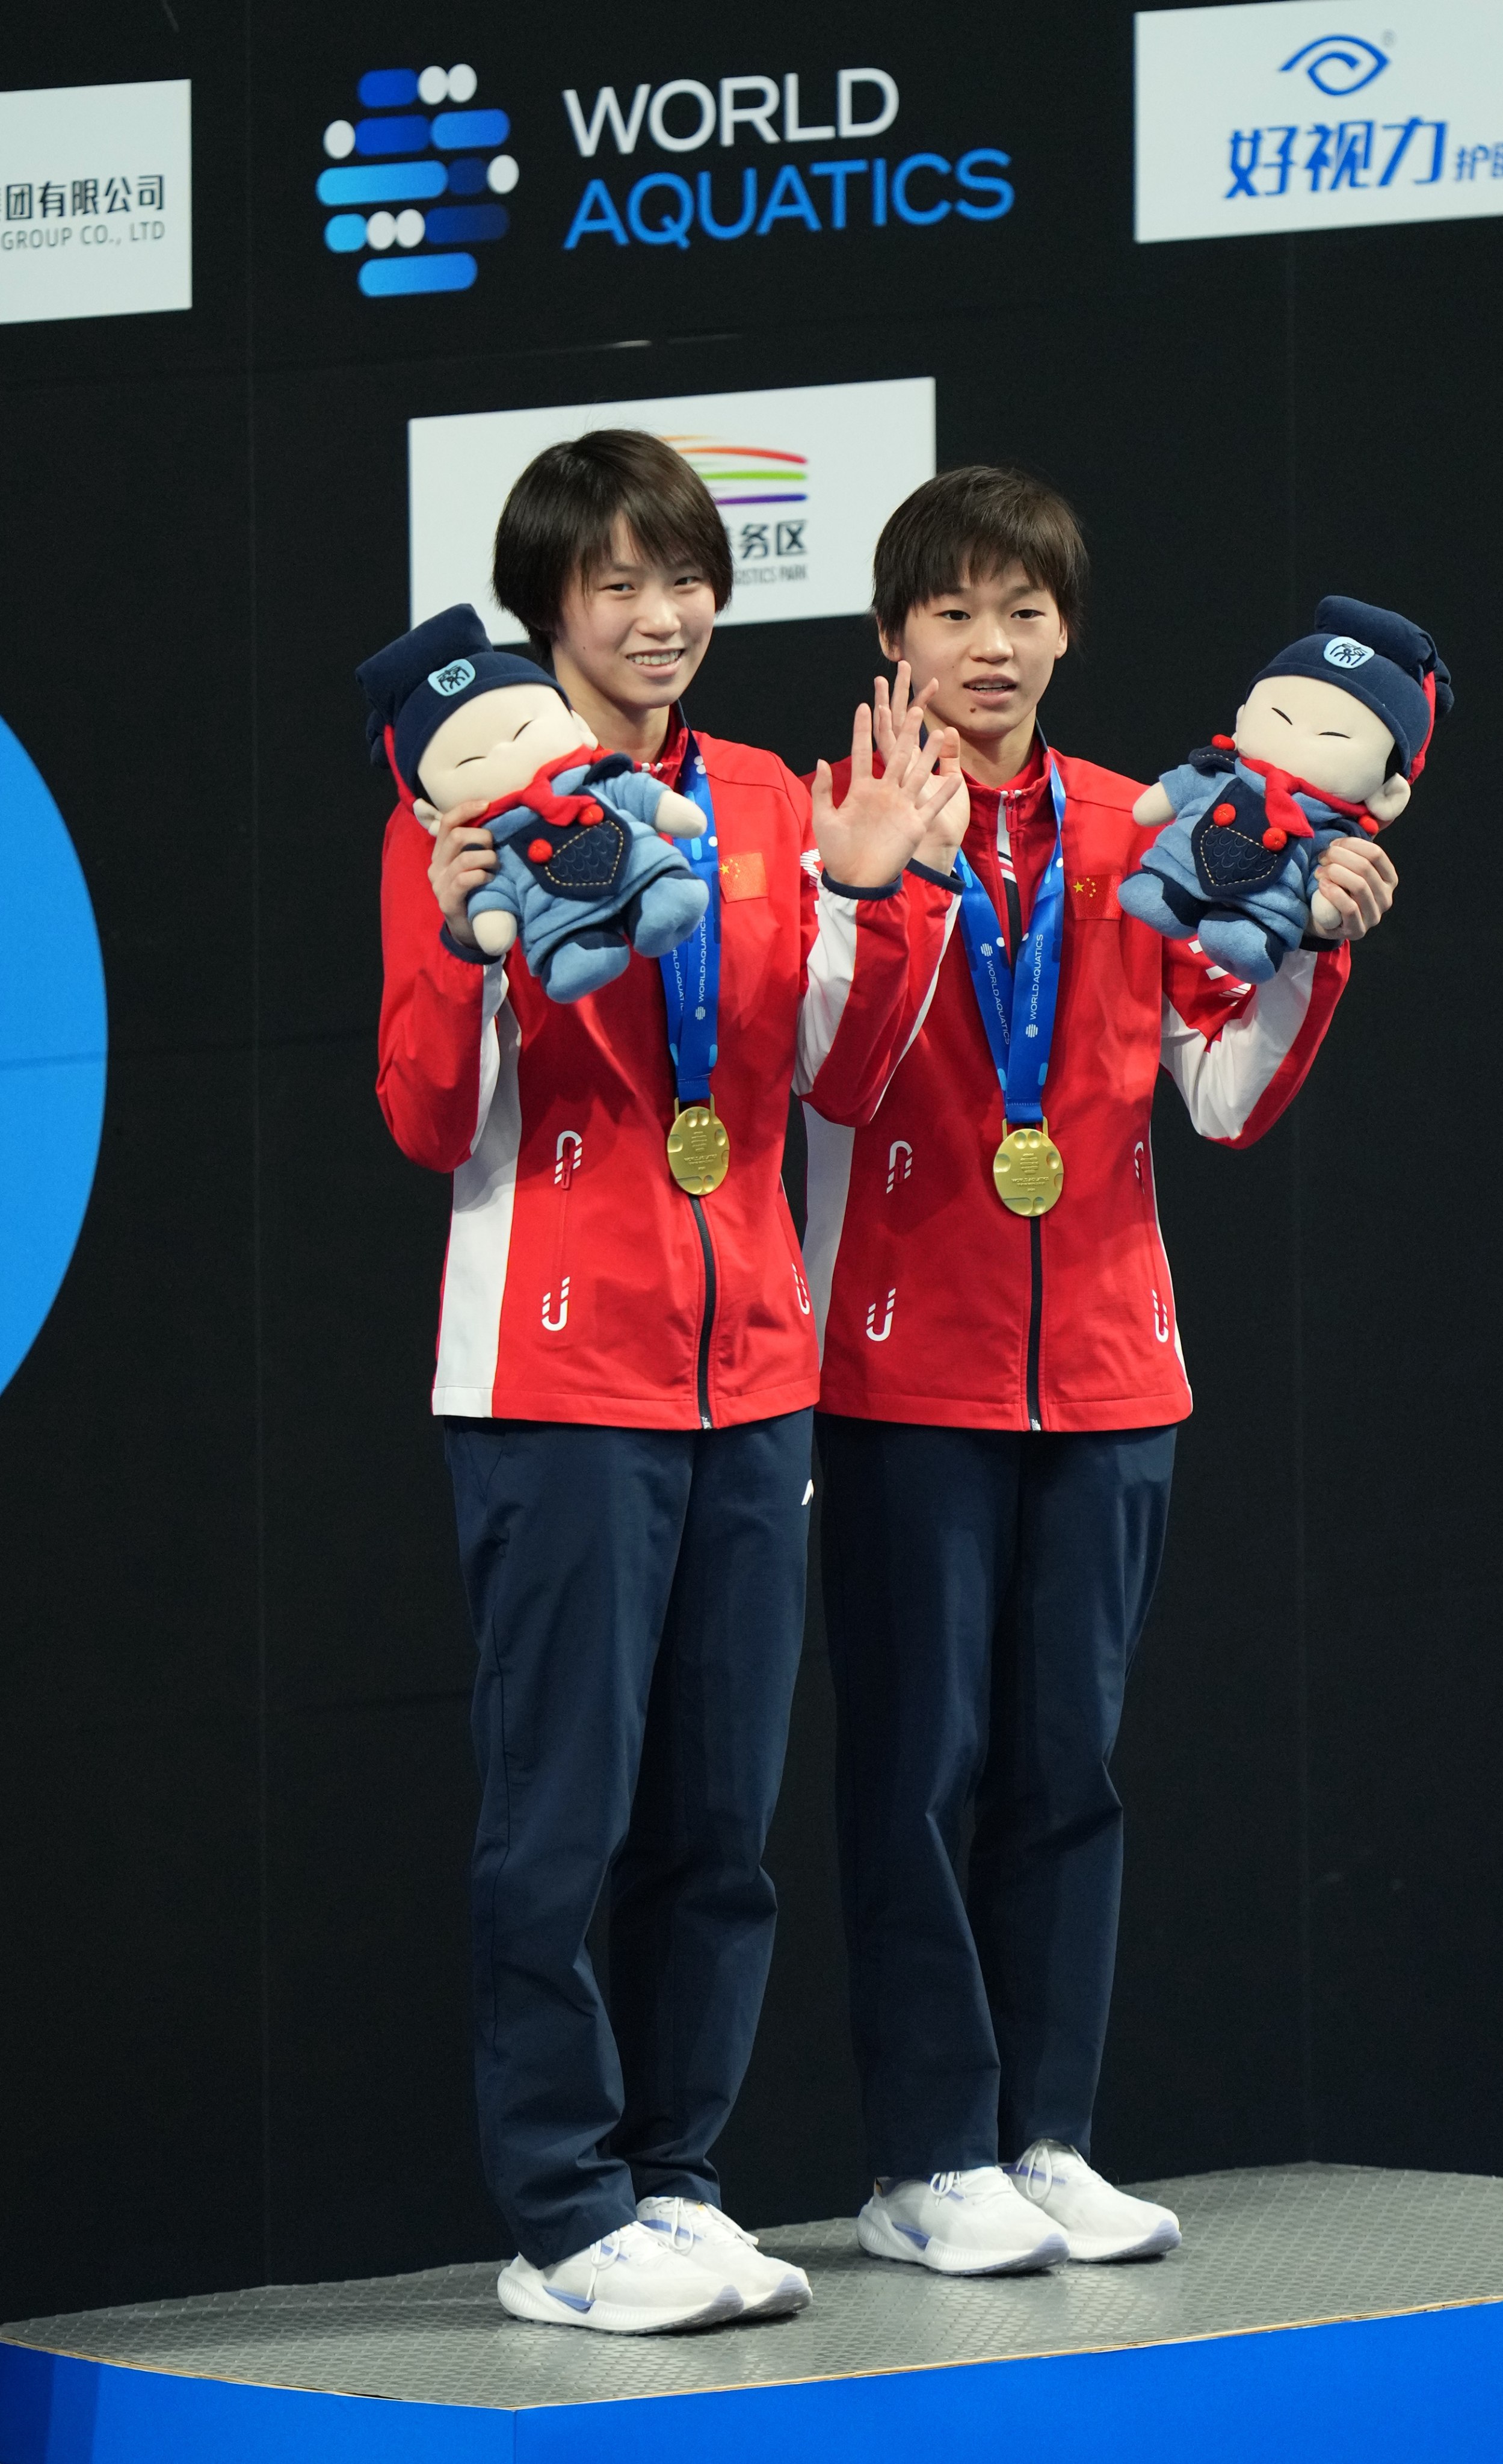 Quan Hongchan (right) and Chen Yuxi of China pose during the medal ceremony after the Women’s 10m Synchronised final at the FINA Diving World Cup in Xian. Photo: Xinhua